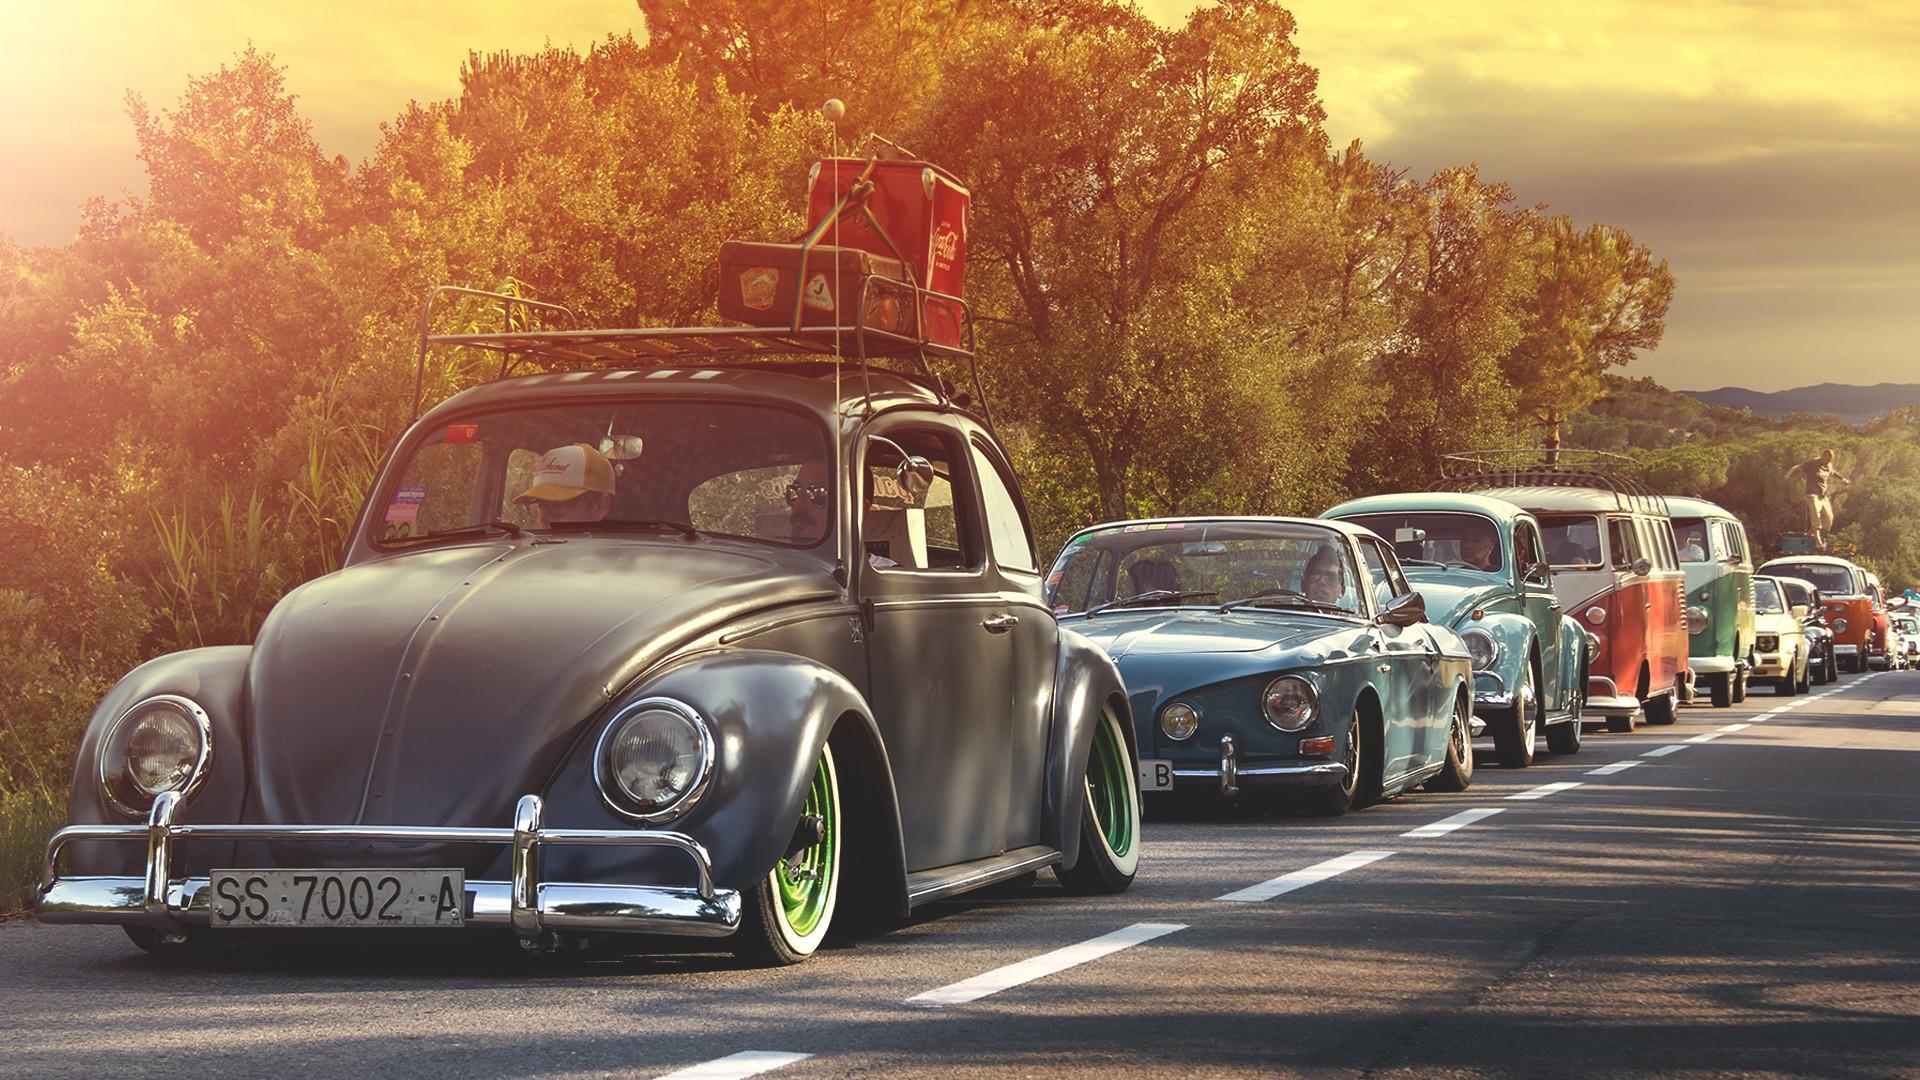 Best Volkswagen Cars Hd Wallpapers For Android Apk Download